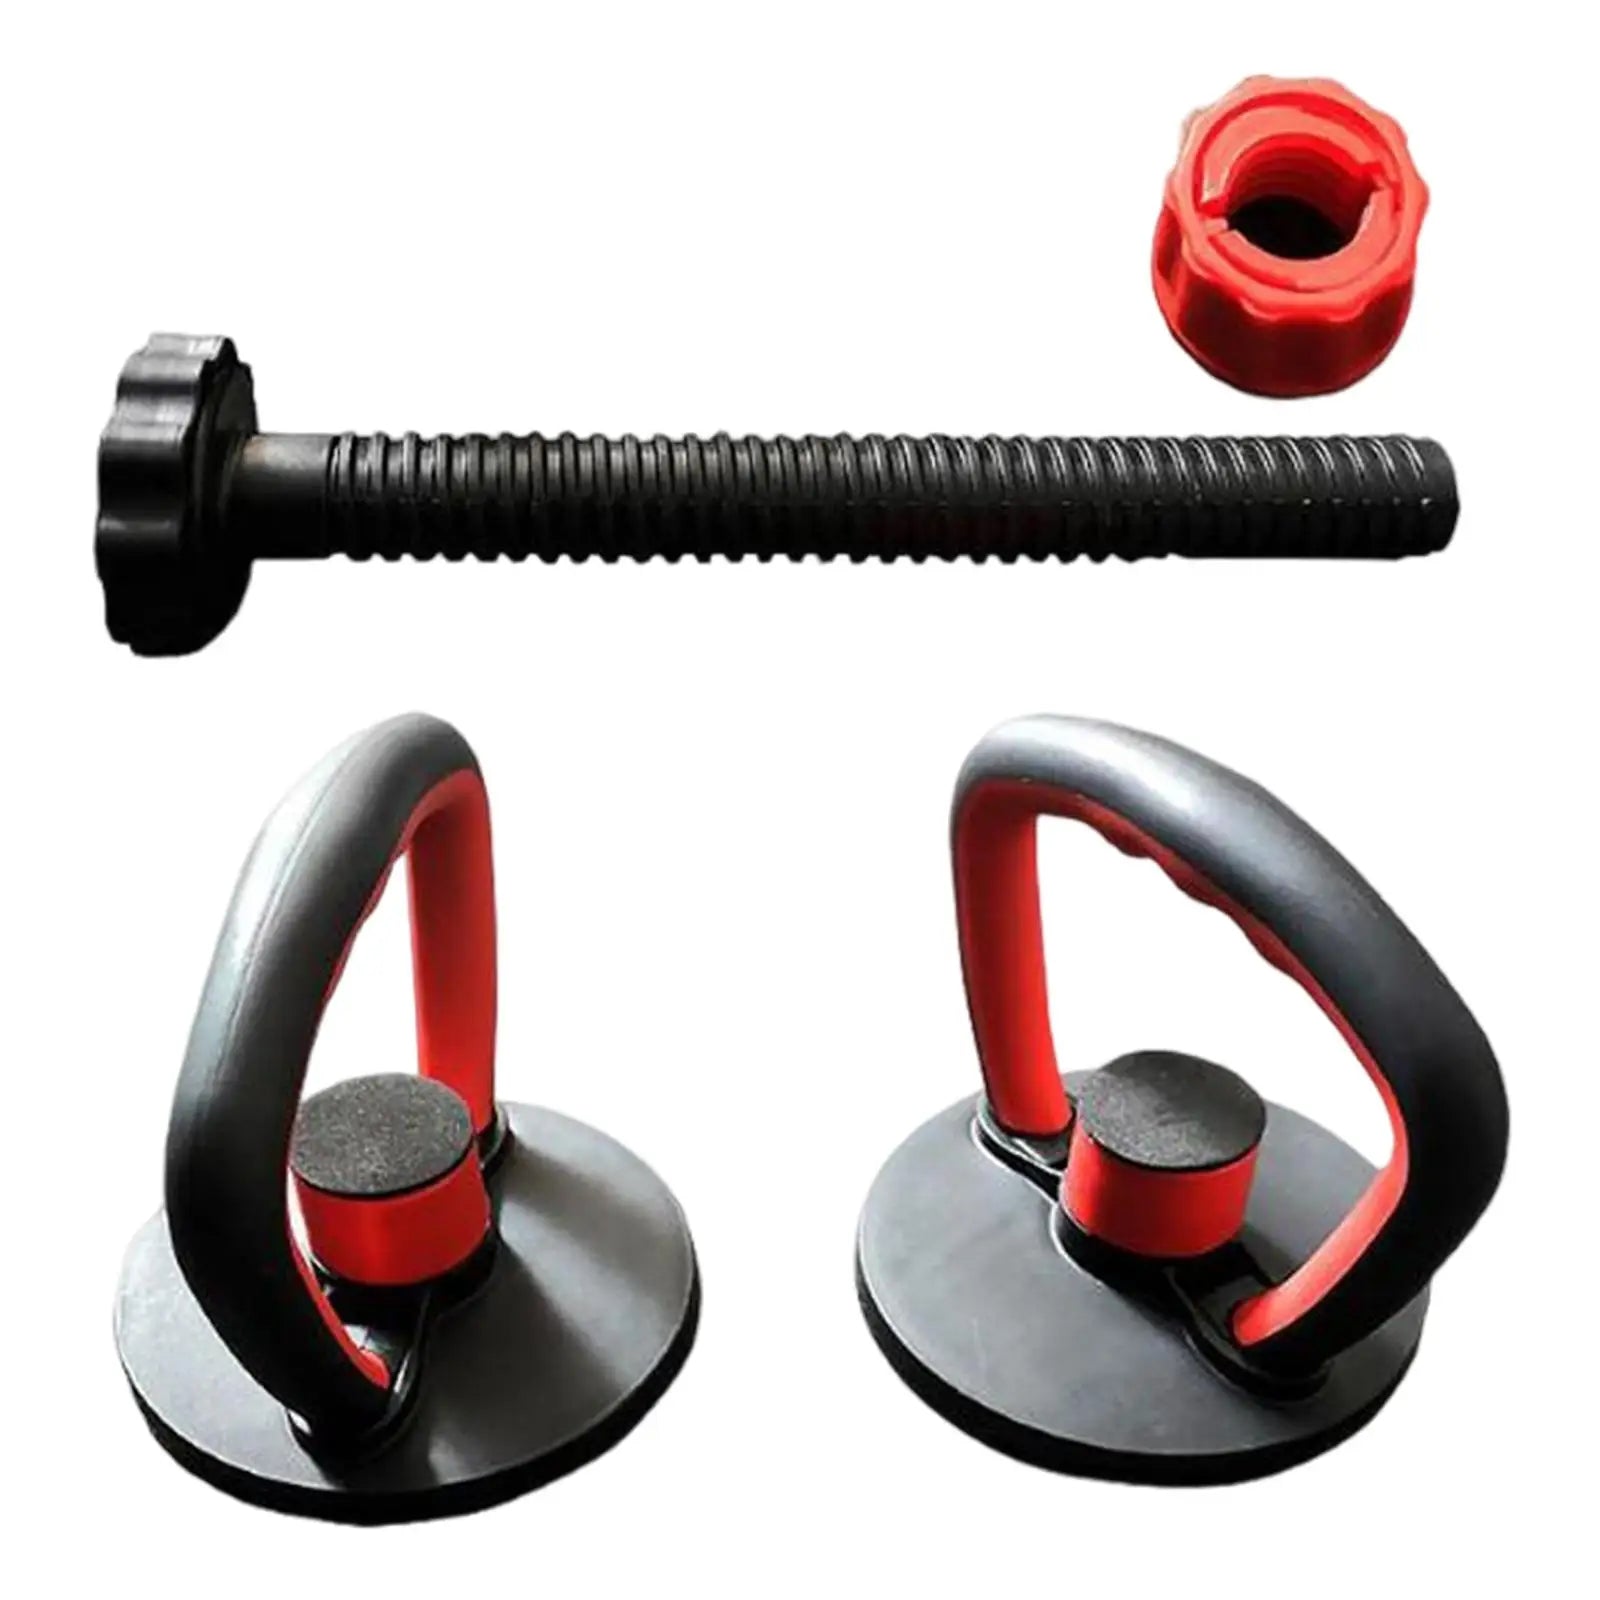 Adjustable Kettlebell Handle for Plates Weights Dumbbell Grip Workout